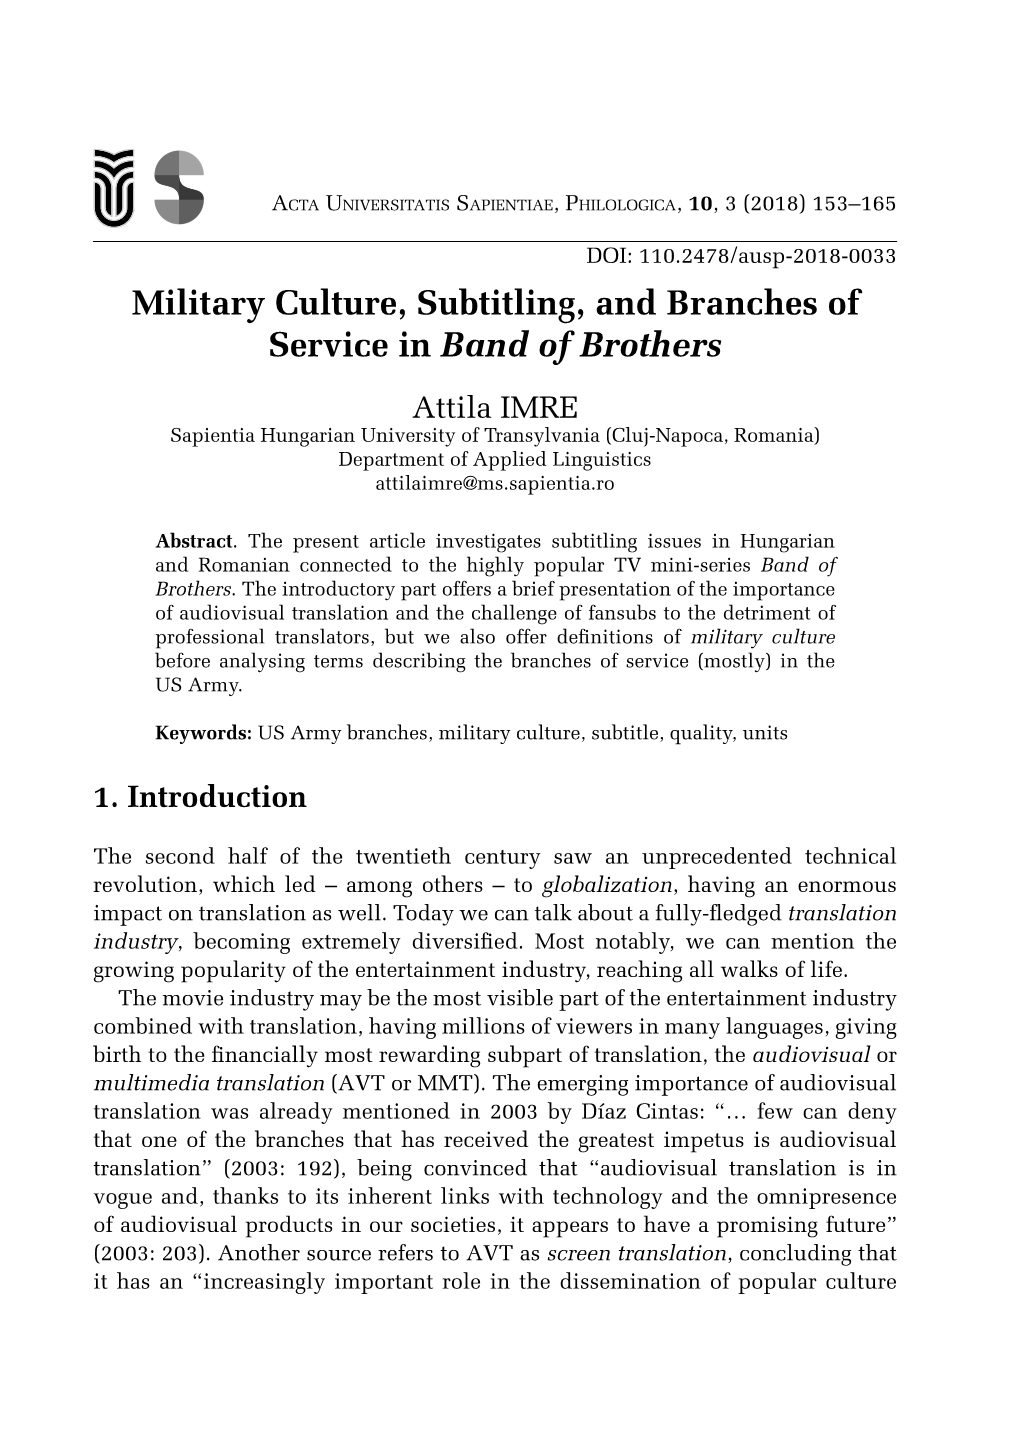 Military Culture, Subtitling, and Branches of Service in Band Of